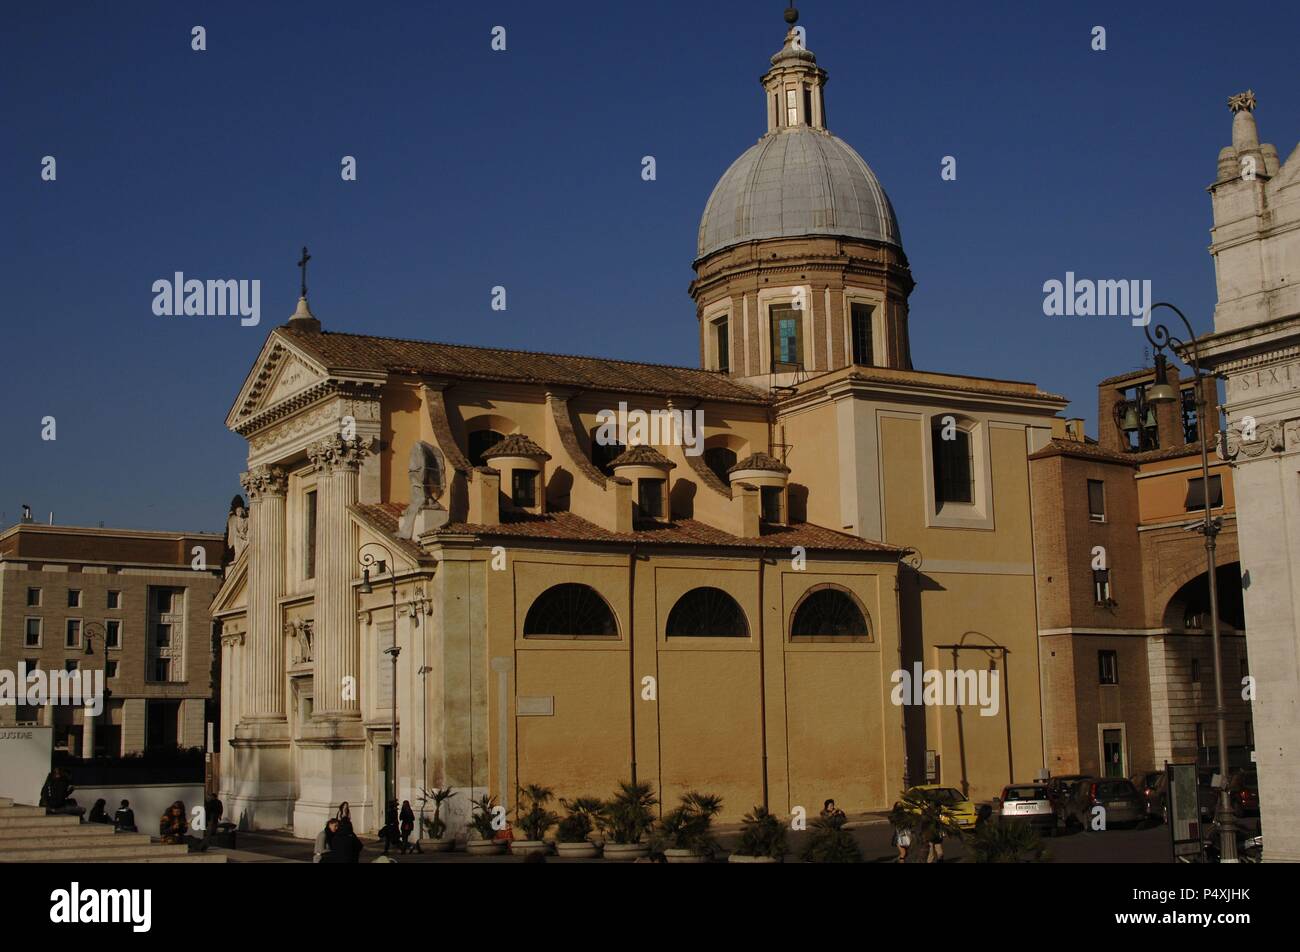 Italy. Rome. Church of Saint Roch (San Rocco). Baroque style. Founded in 1499 by Pope Alexander VI, it was rebuilt in 1657 by Giovan Antonio de' Rossi (1616-1695). Later changes were made introducing the Neo-Classical style. Giuseppe Valadier (1762-1839) built a new Palladio-influenced facade in 1832. Stock Photo